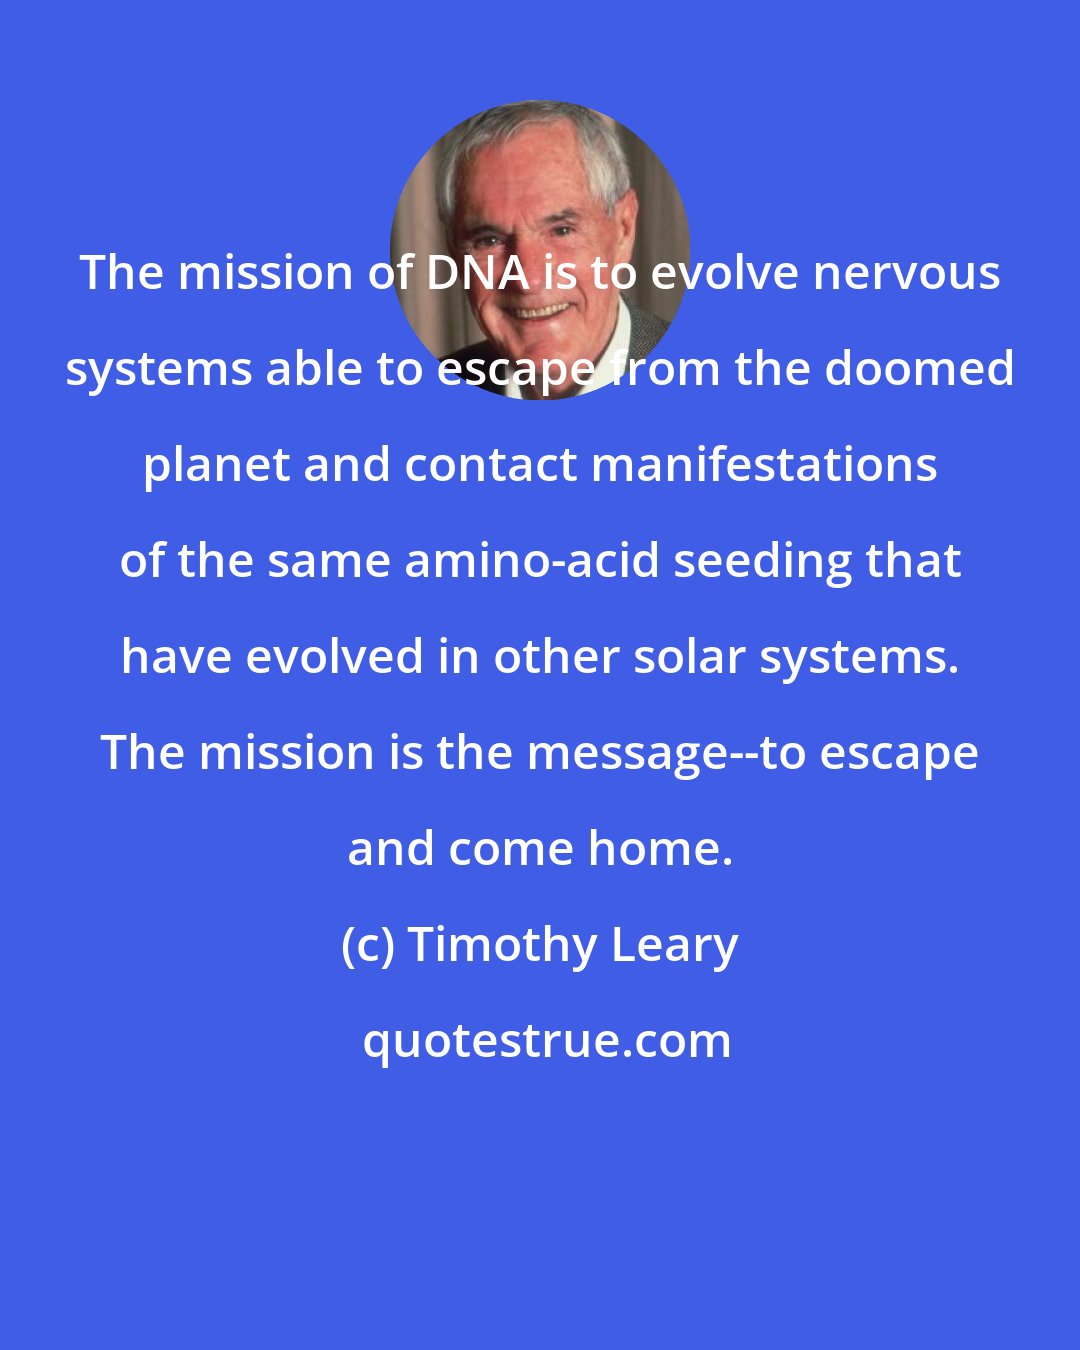 Timothy Leary: The mission of DNA is to evolve nervous systems able to escape from the doomed planet and contact manifestations of the same amino-acid seeding that have evolved in other solar systems. The mission is the message--to escape and come home.